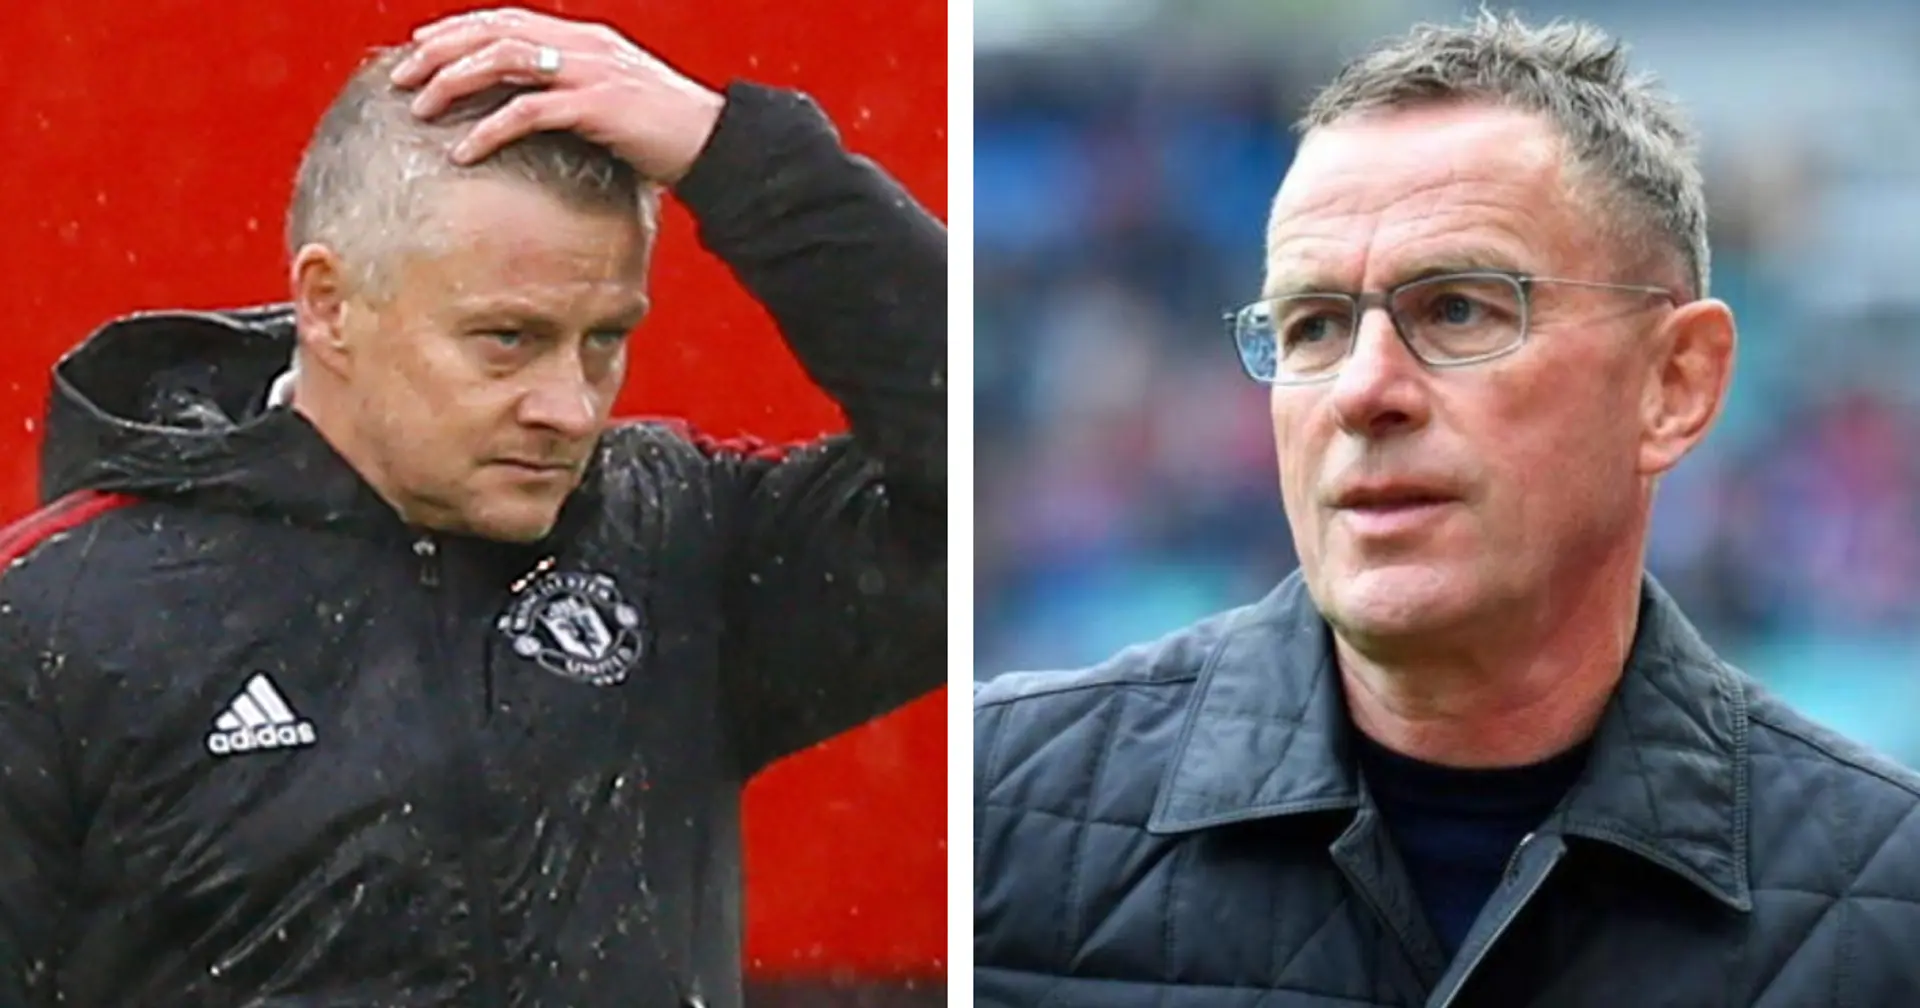 'Godfather of German coaches': Man United fans discuss replacing Solskjaer with Ralf Rangnick